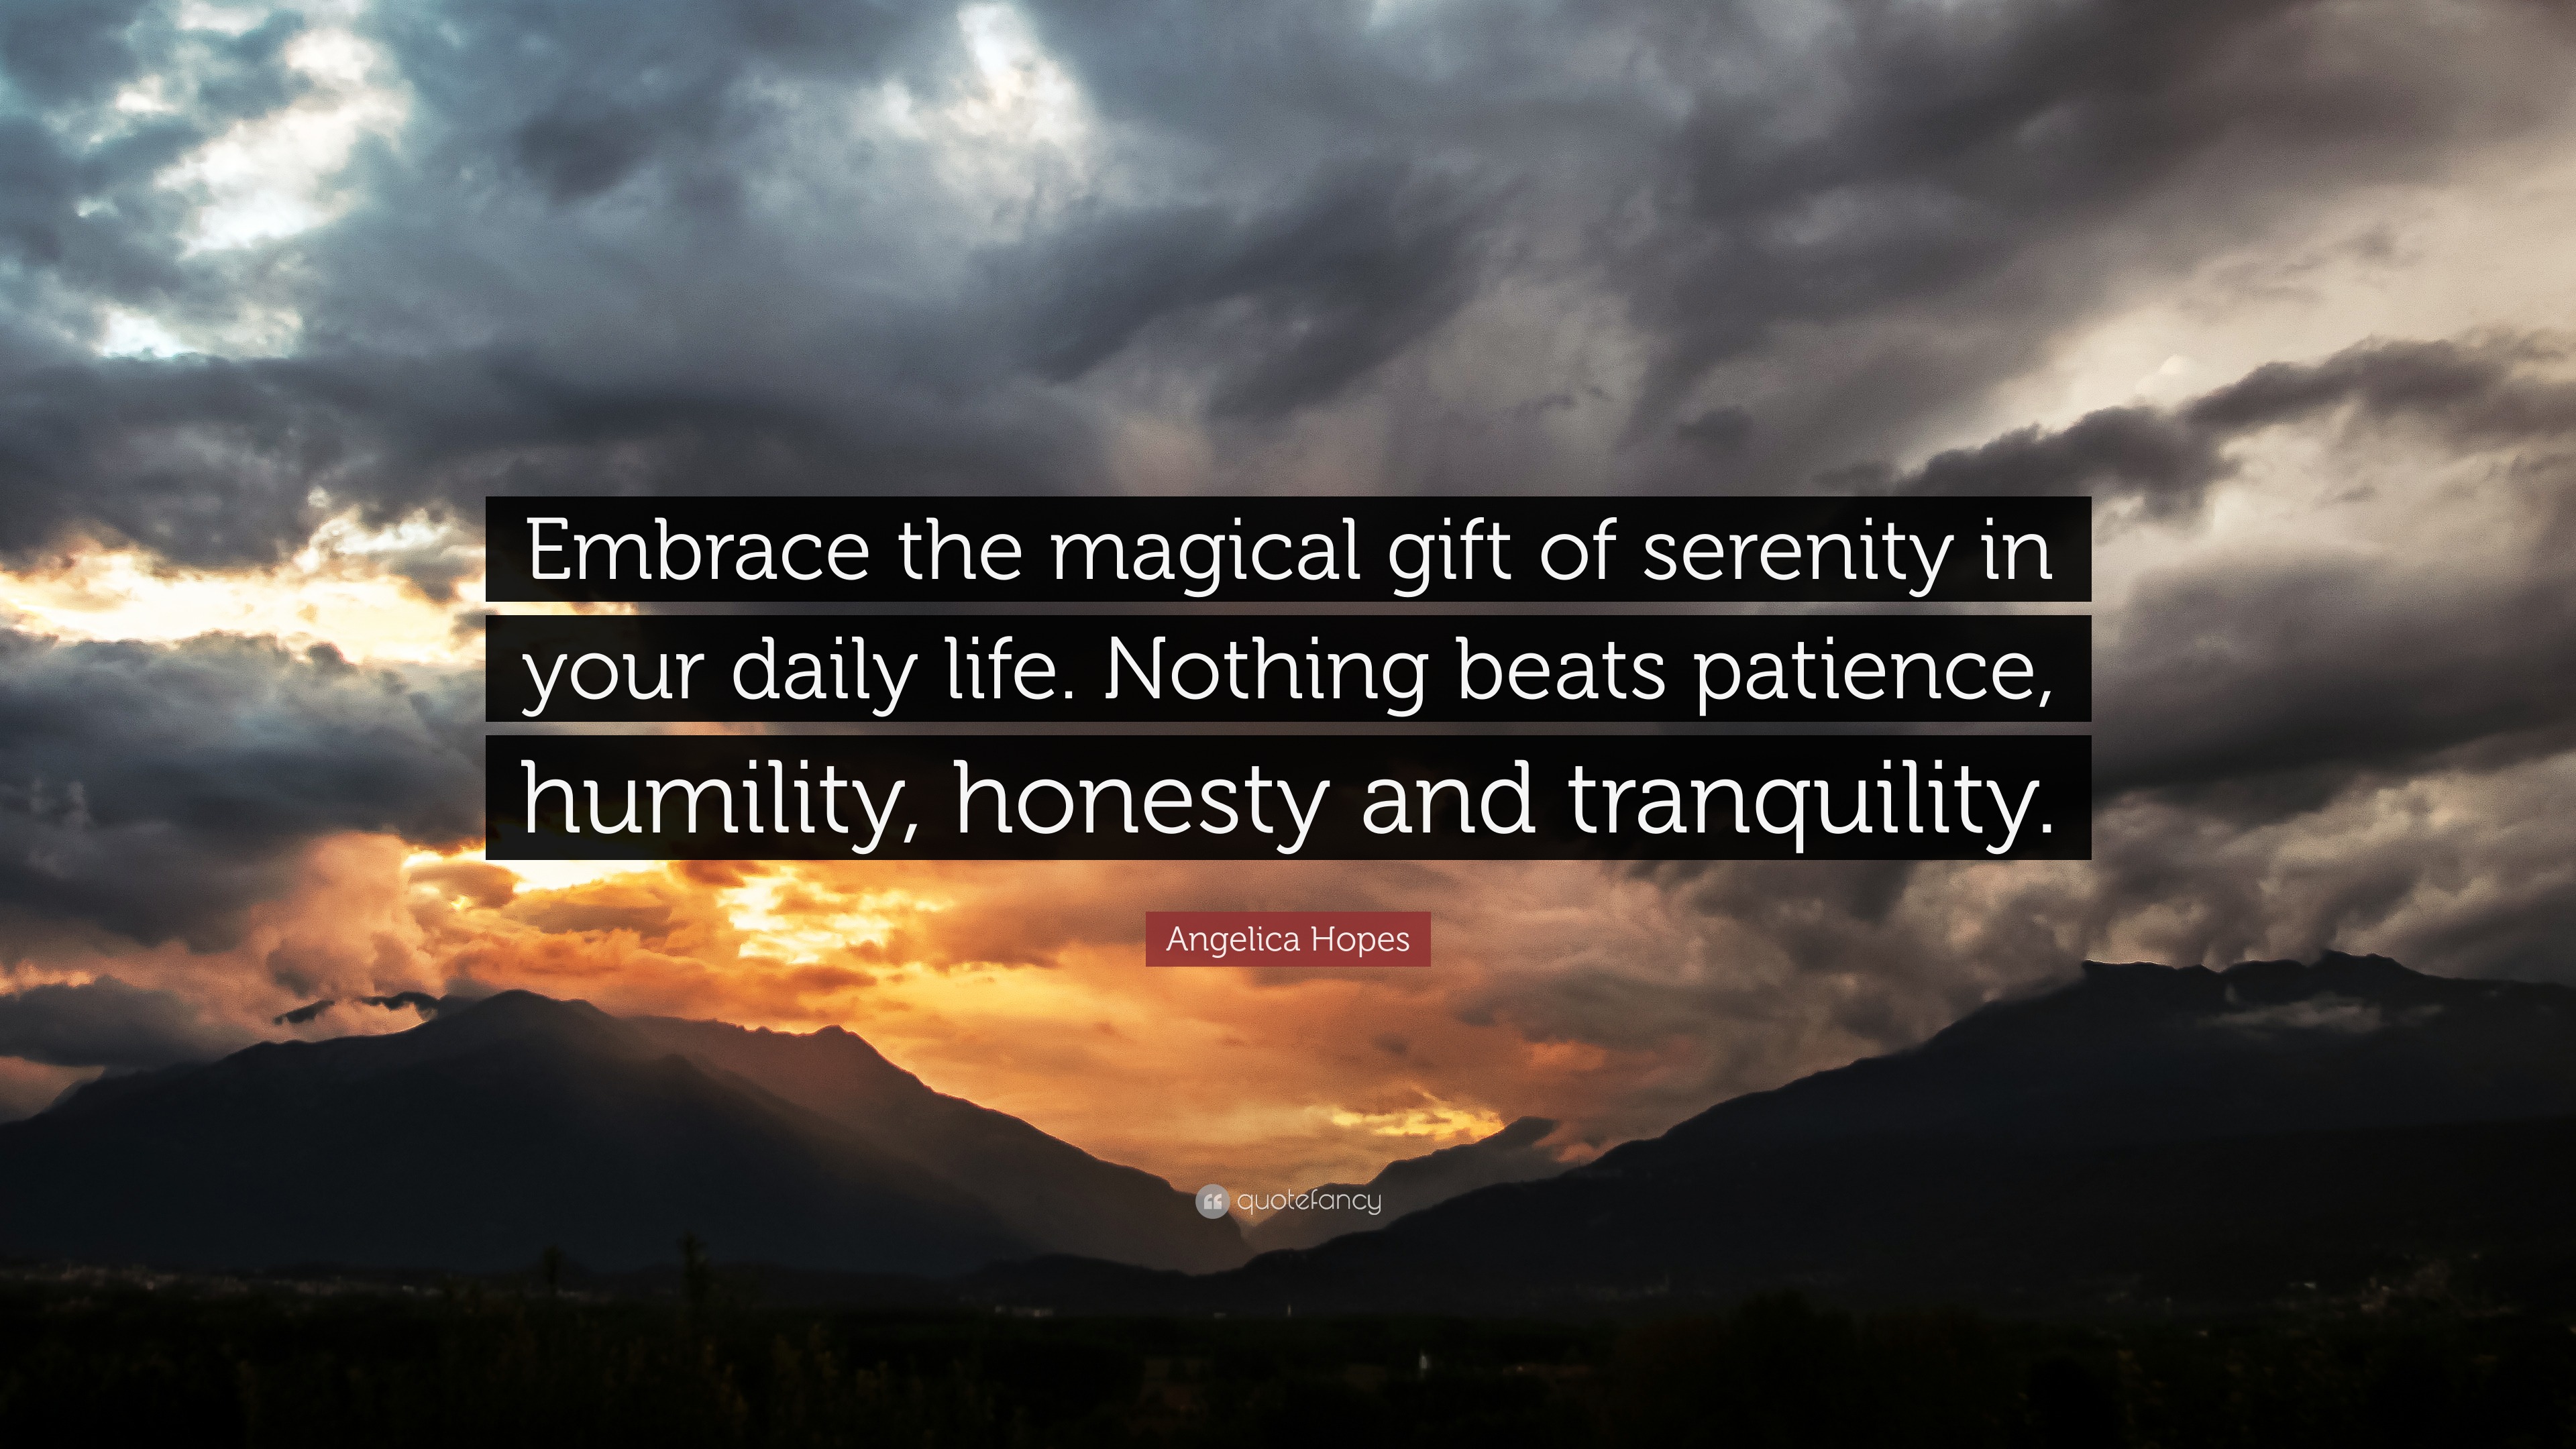 Angelica Hopes Quote: “Embrace the magical gift of serenity in